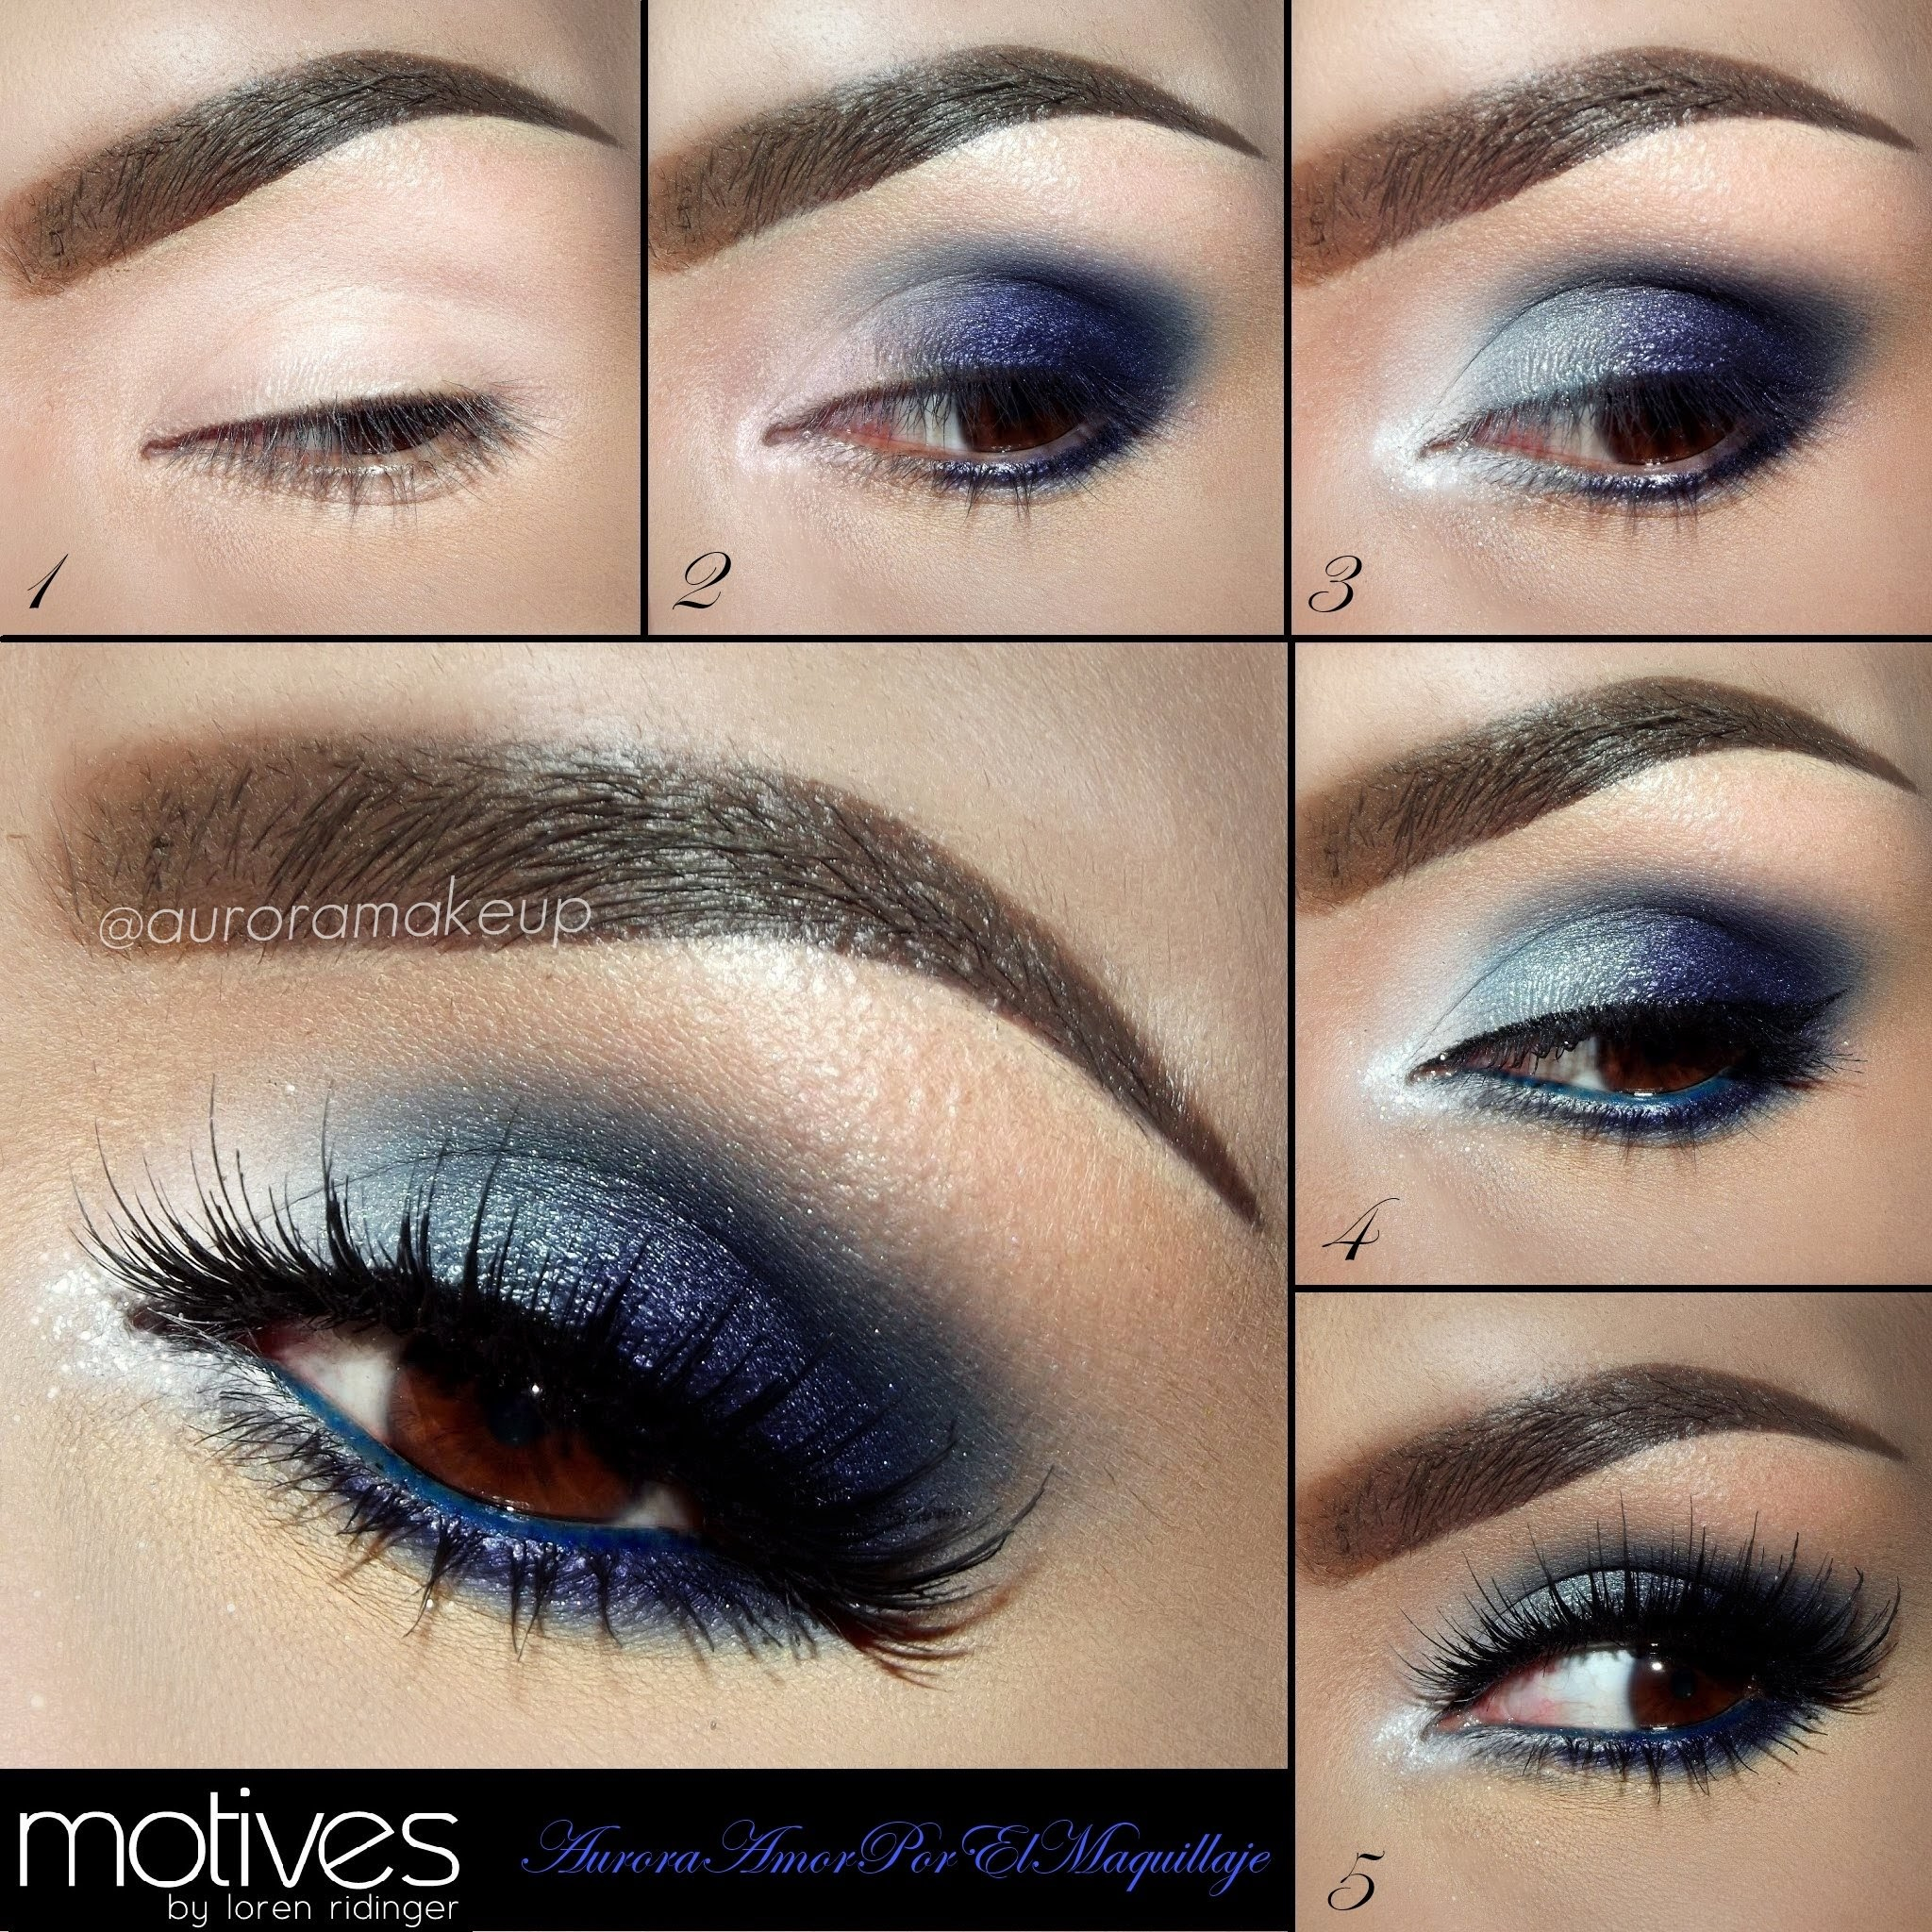 How To Do Makeup For Brown Eyes Blue Eye Shadow For Brown Eyes Tutorial With Aurora Makeup And